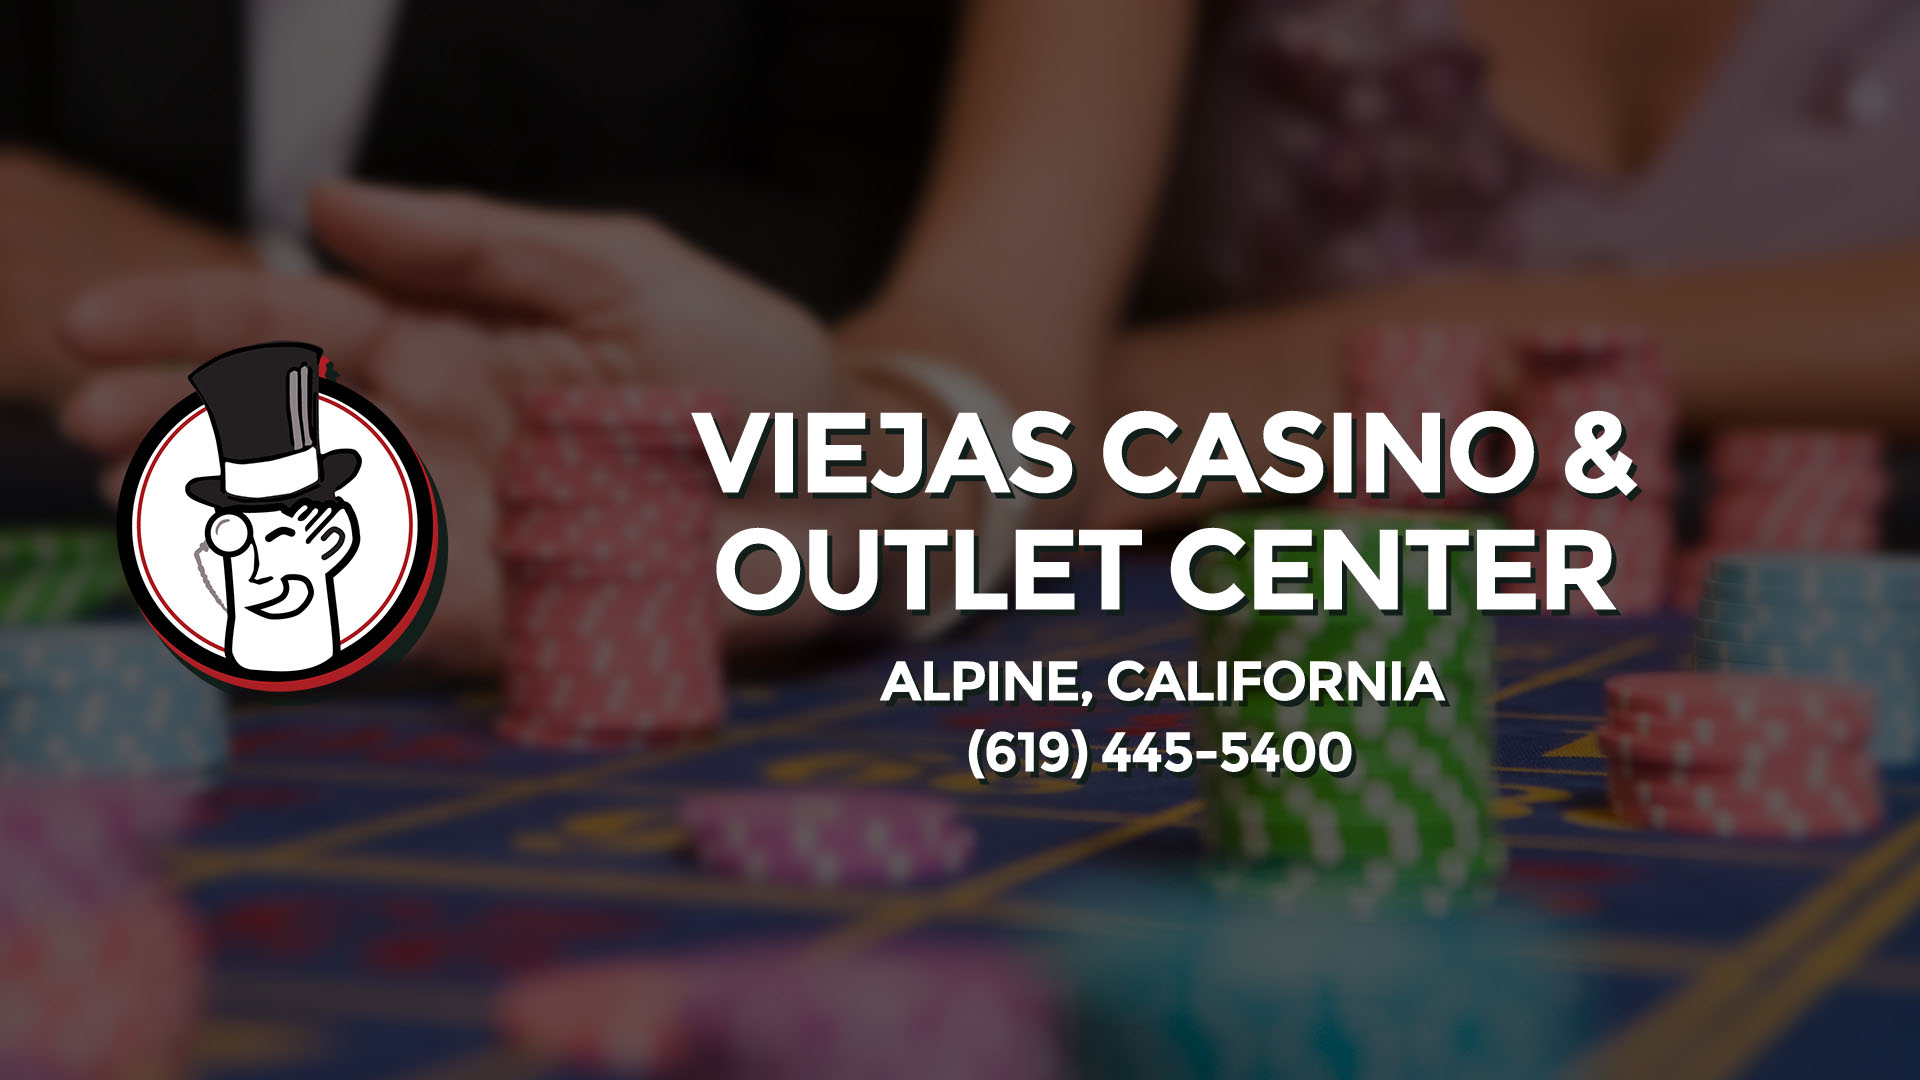 shuttle from mexicali to viejas casino